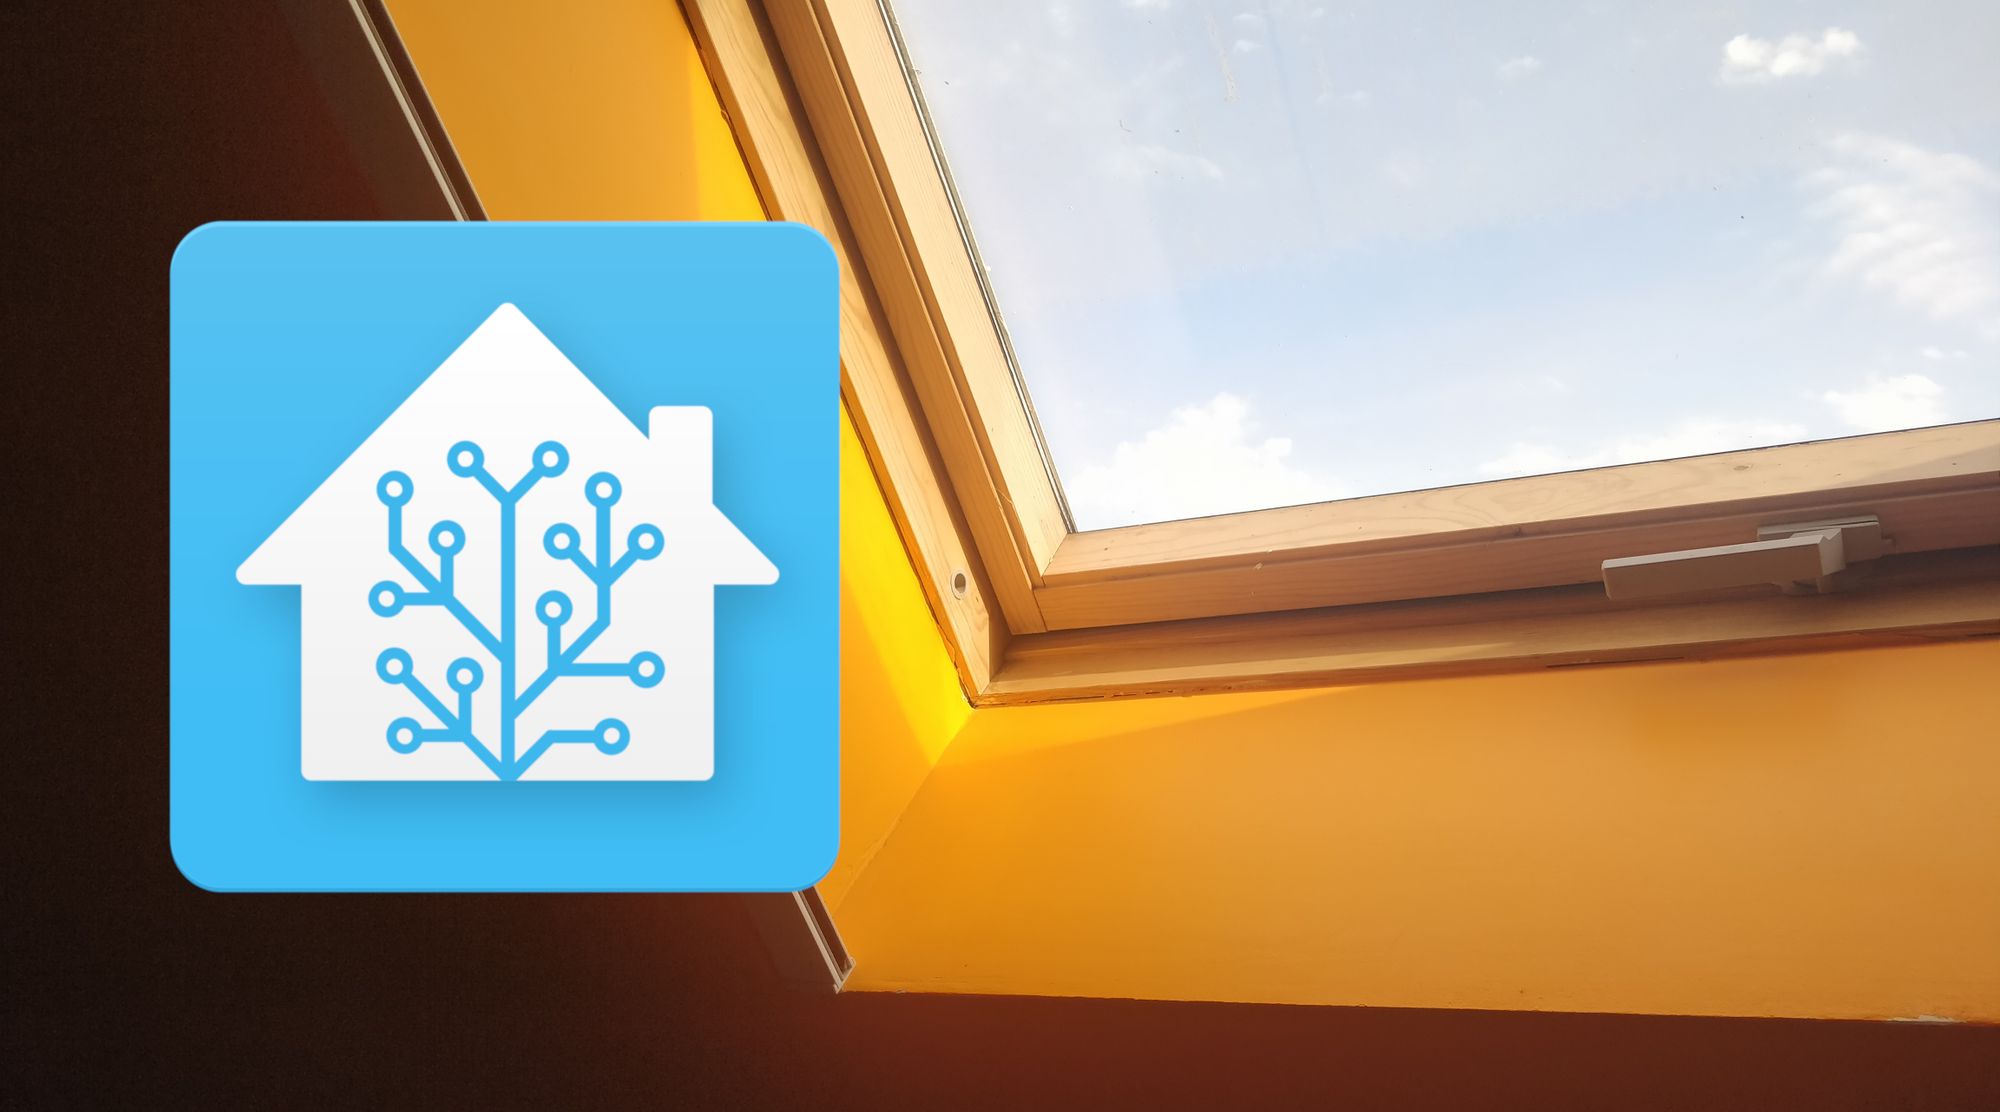 Keeping it cool, automating a window